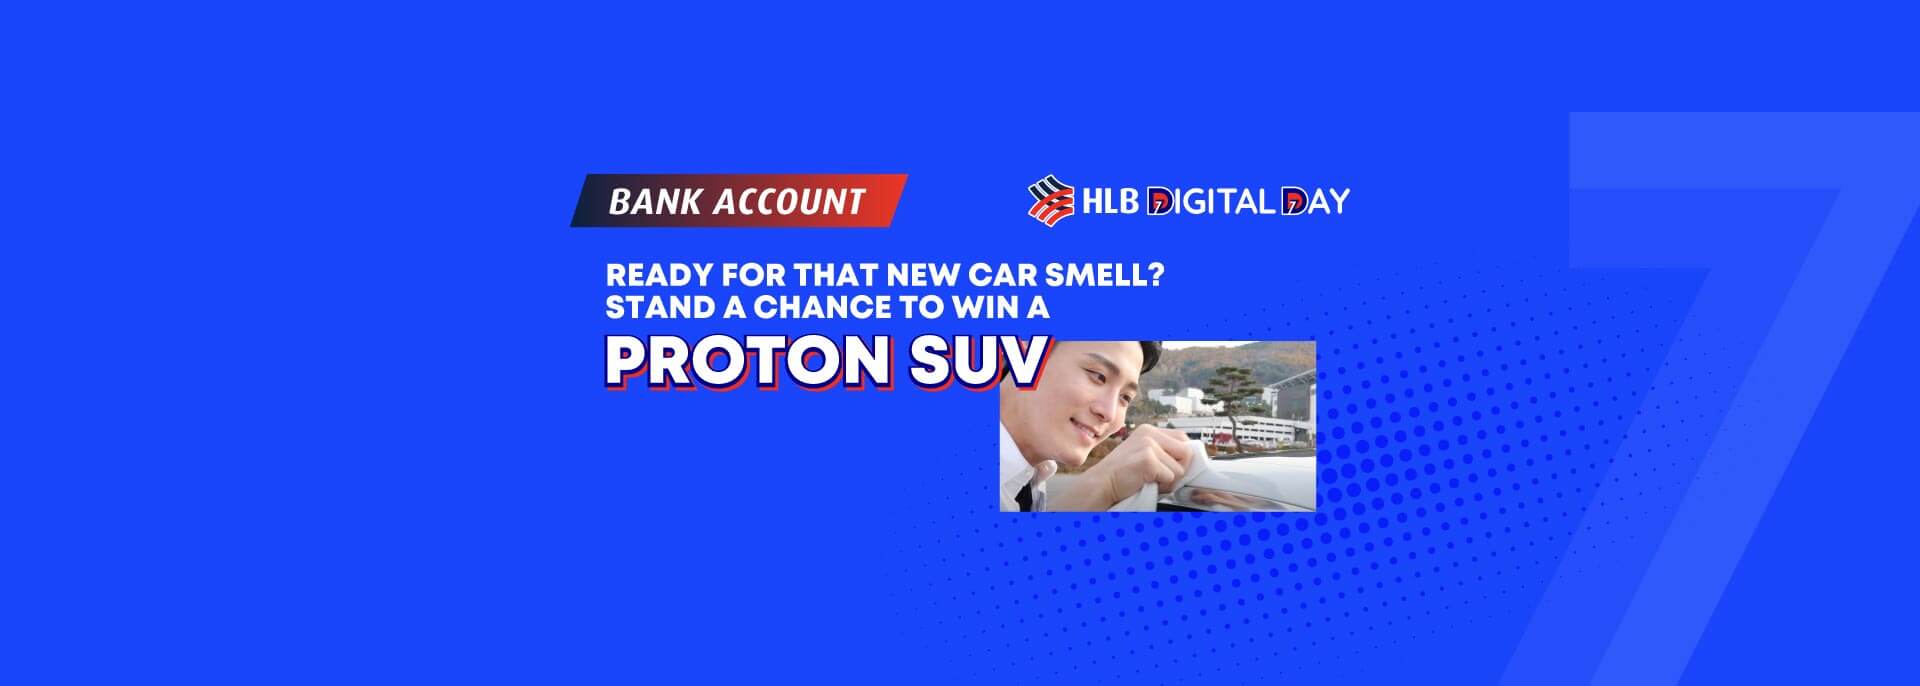 ONLY IN JULY. Stand to win a Proton SUV when you open a bank account or make a deposit